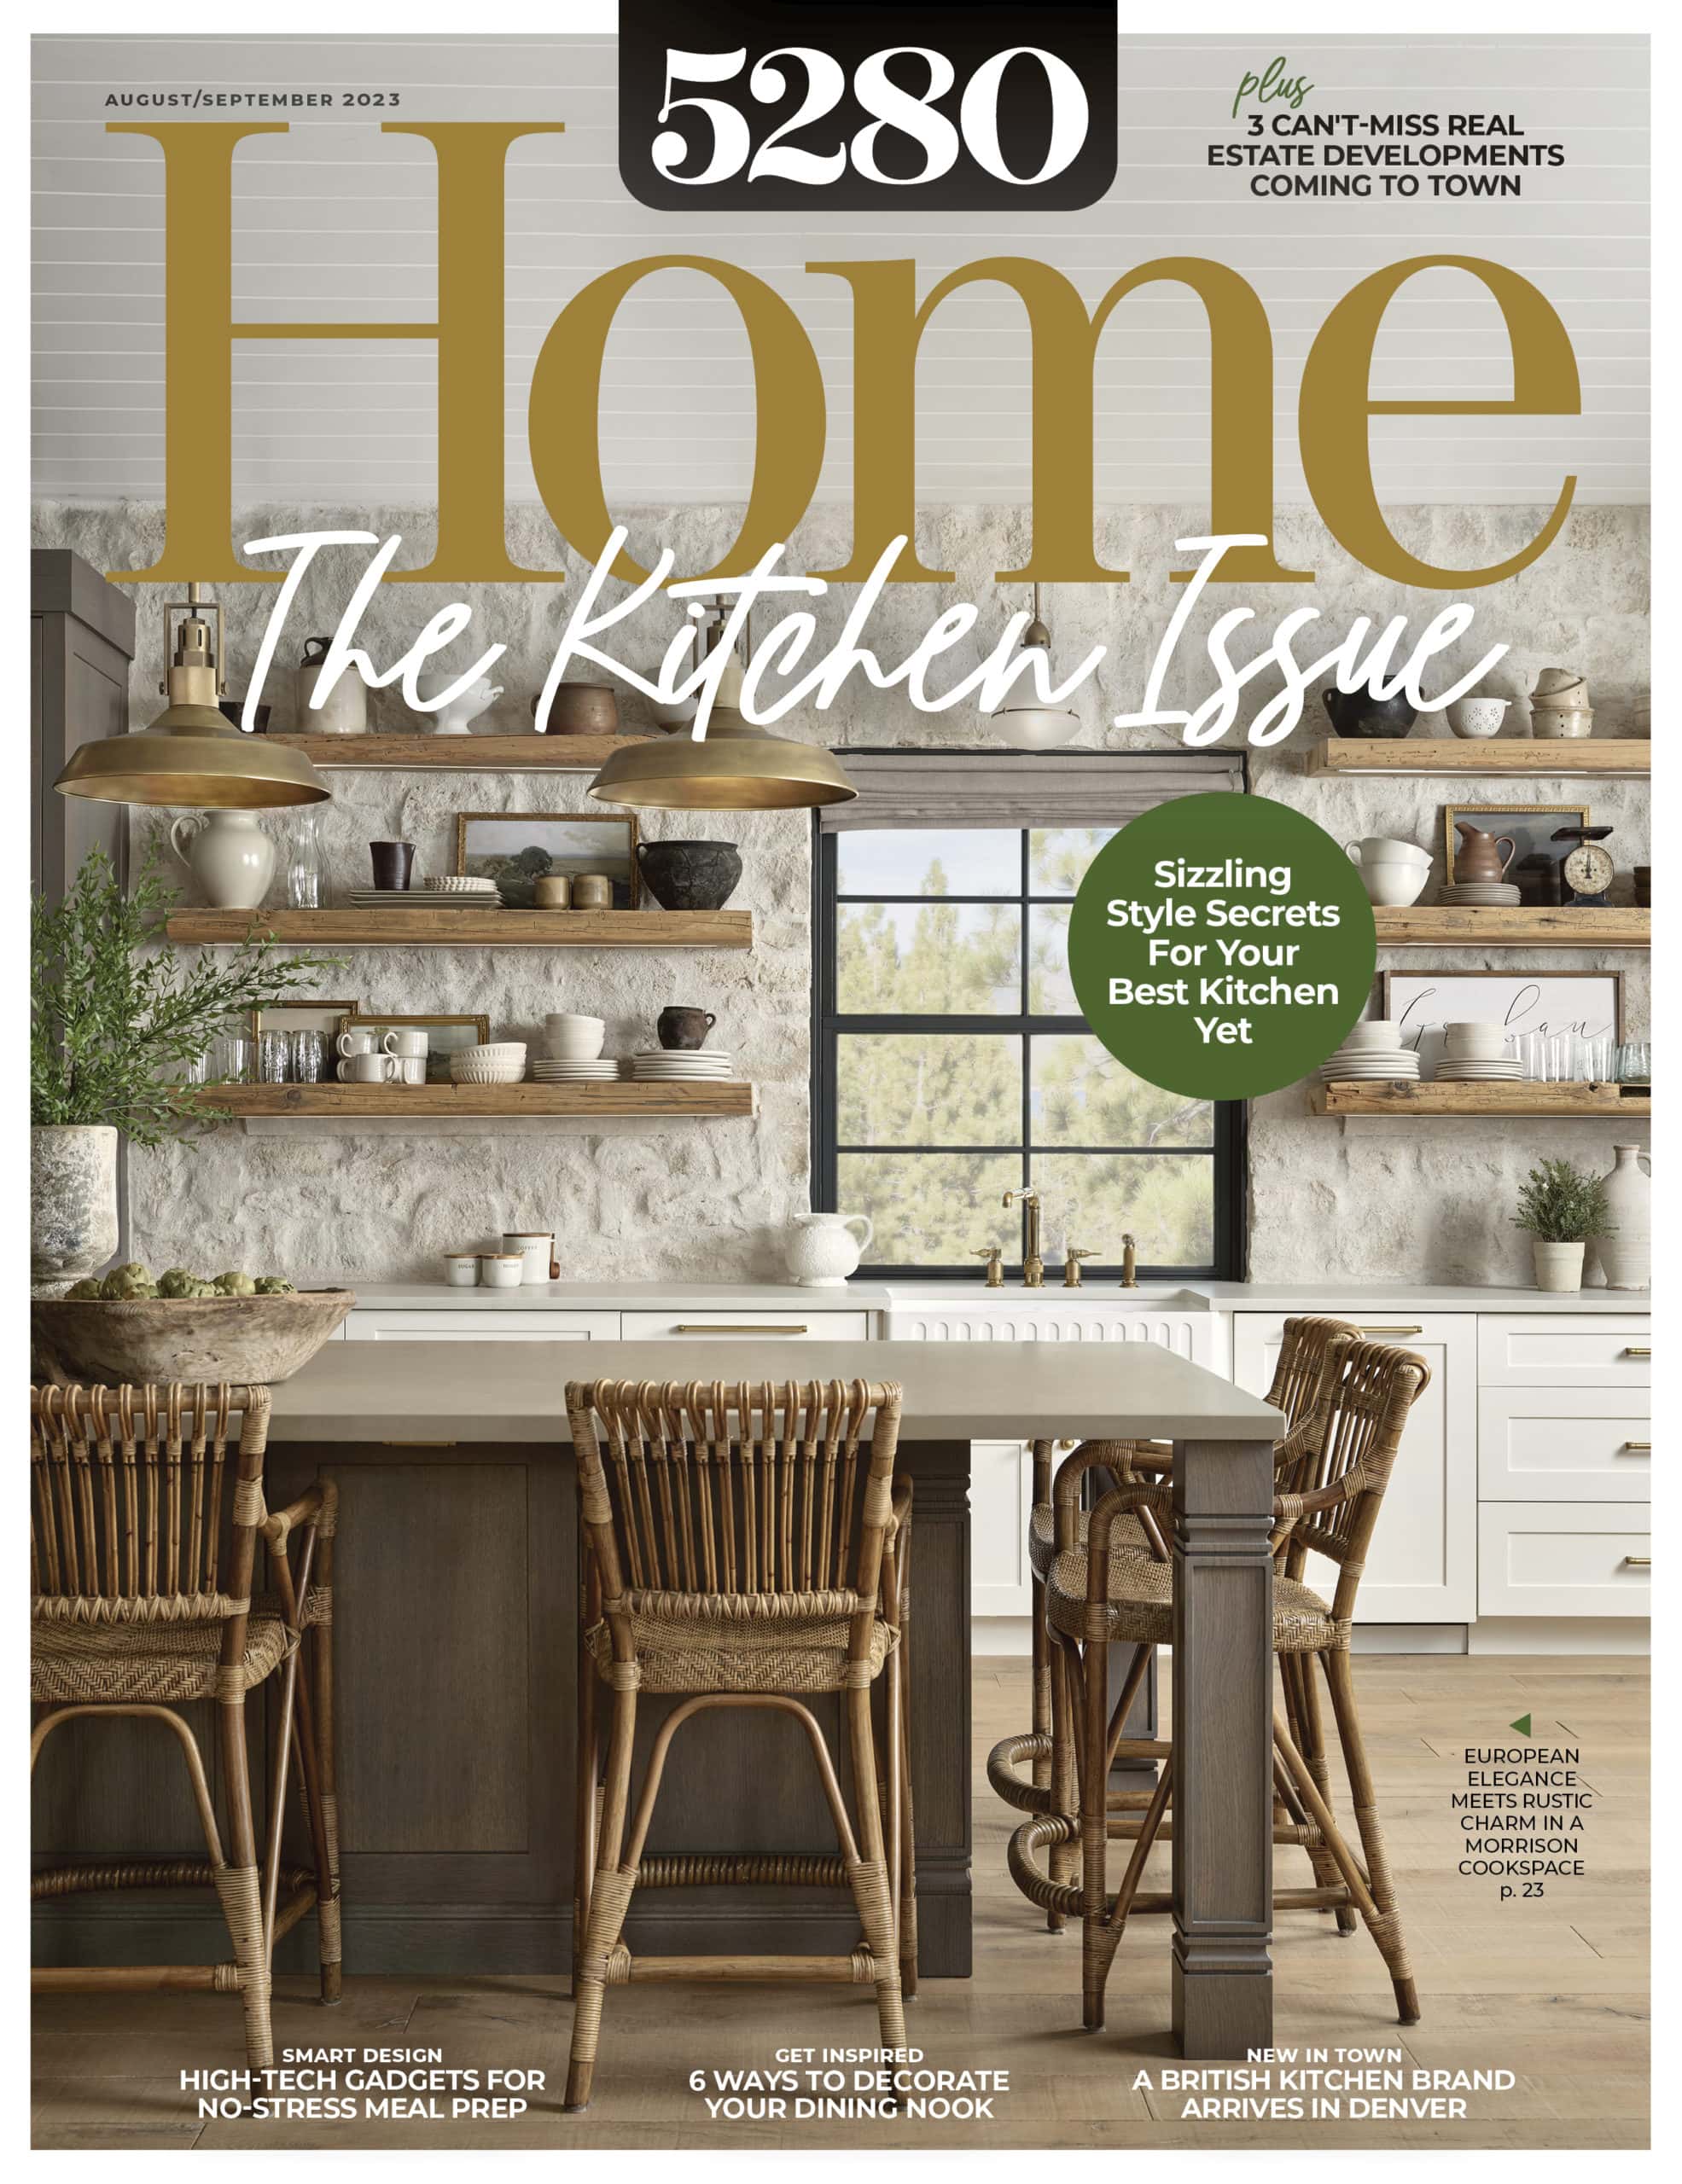 Kitchen Issue Cover 5280 HOME Aug Sep 2023